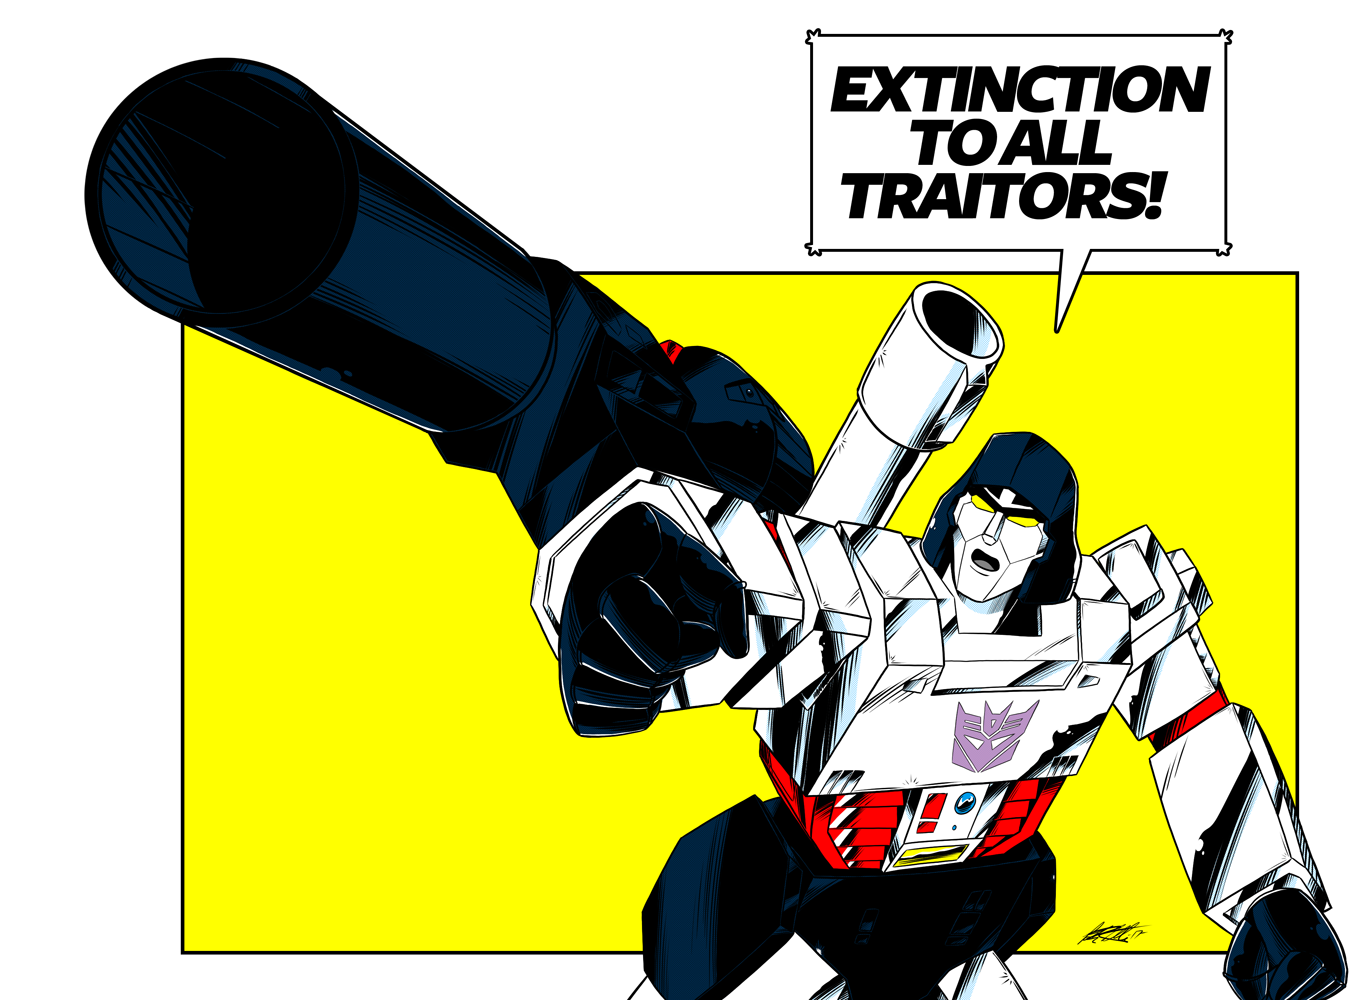 Extinction to All Traitors! (comic colors)